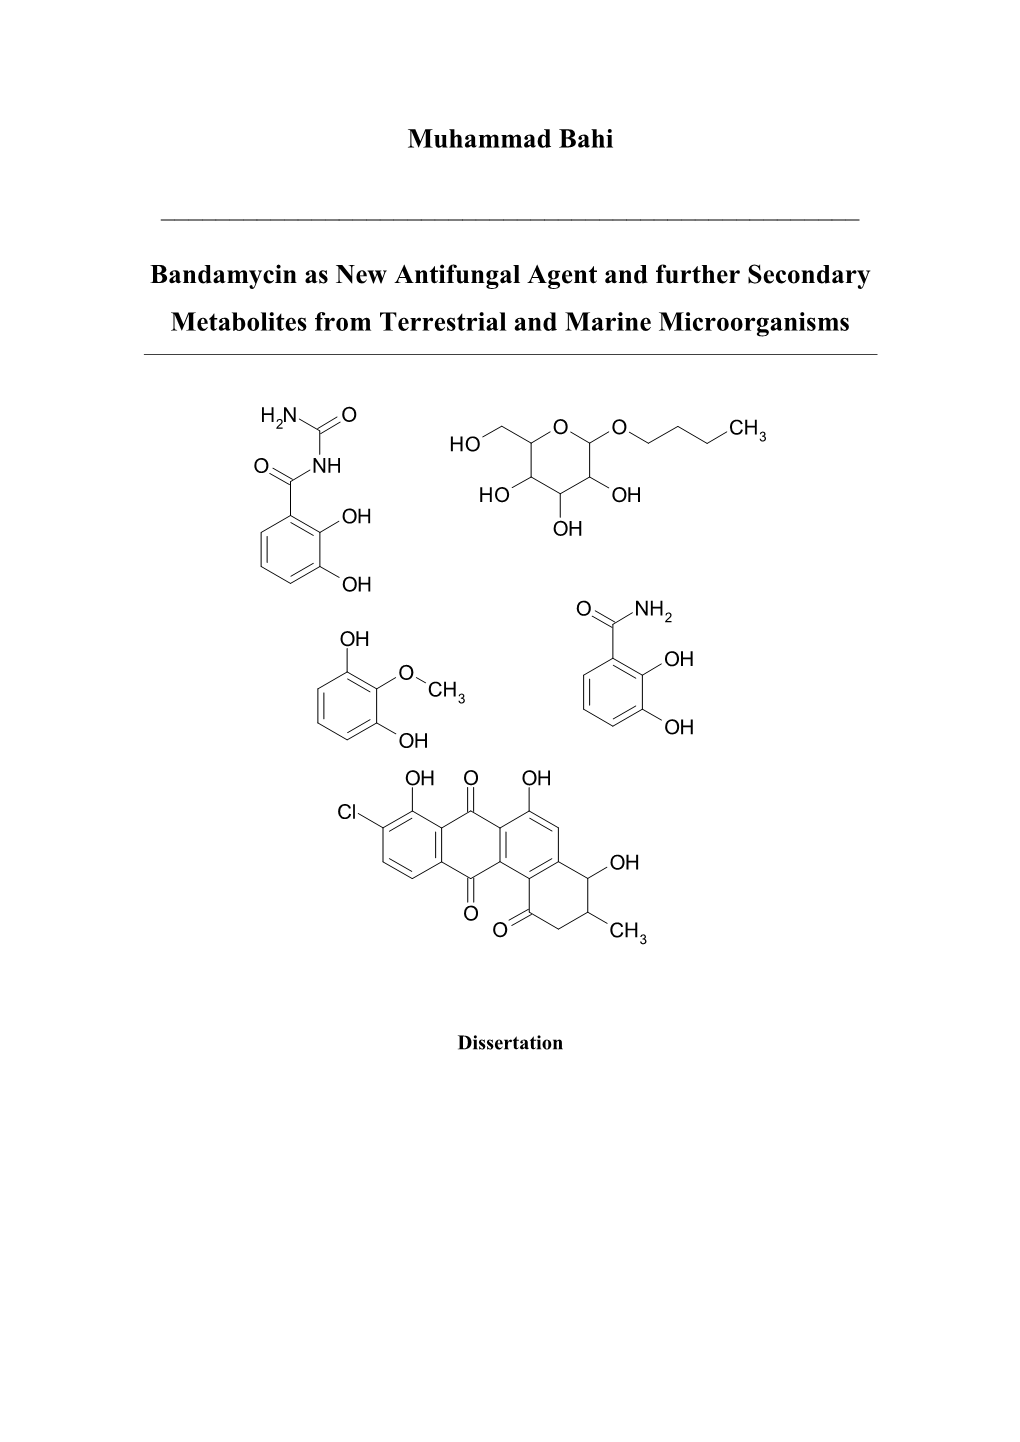 Bandamycin As New Antifungal Agent and Further Secondary Metabolites from Terrestrial and Marine Microorganisms